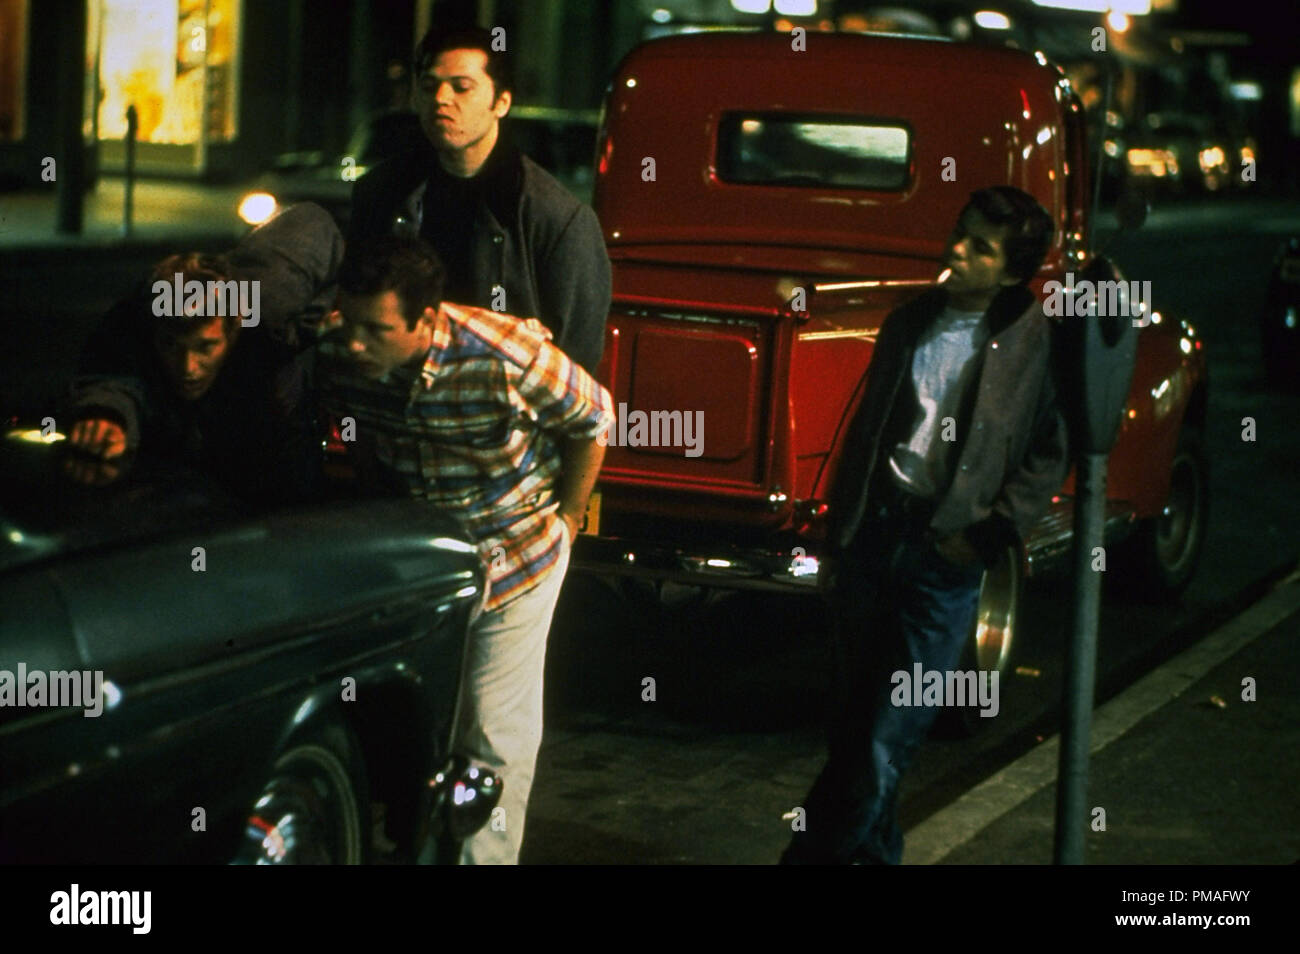 Studio released publicity film still from 'American Graffiti' Bo Hopkins, Richard Dreyfuss, Beau Gentry, Manuel Padilla Jr., 1973 Universal Pictures   File Reference # 32633 830THA Stock Photo